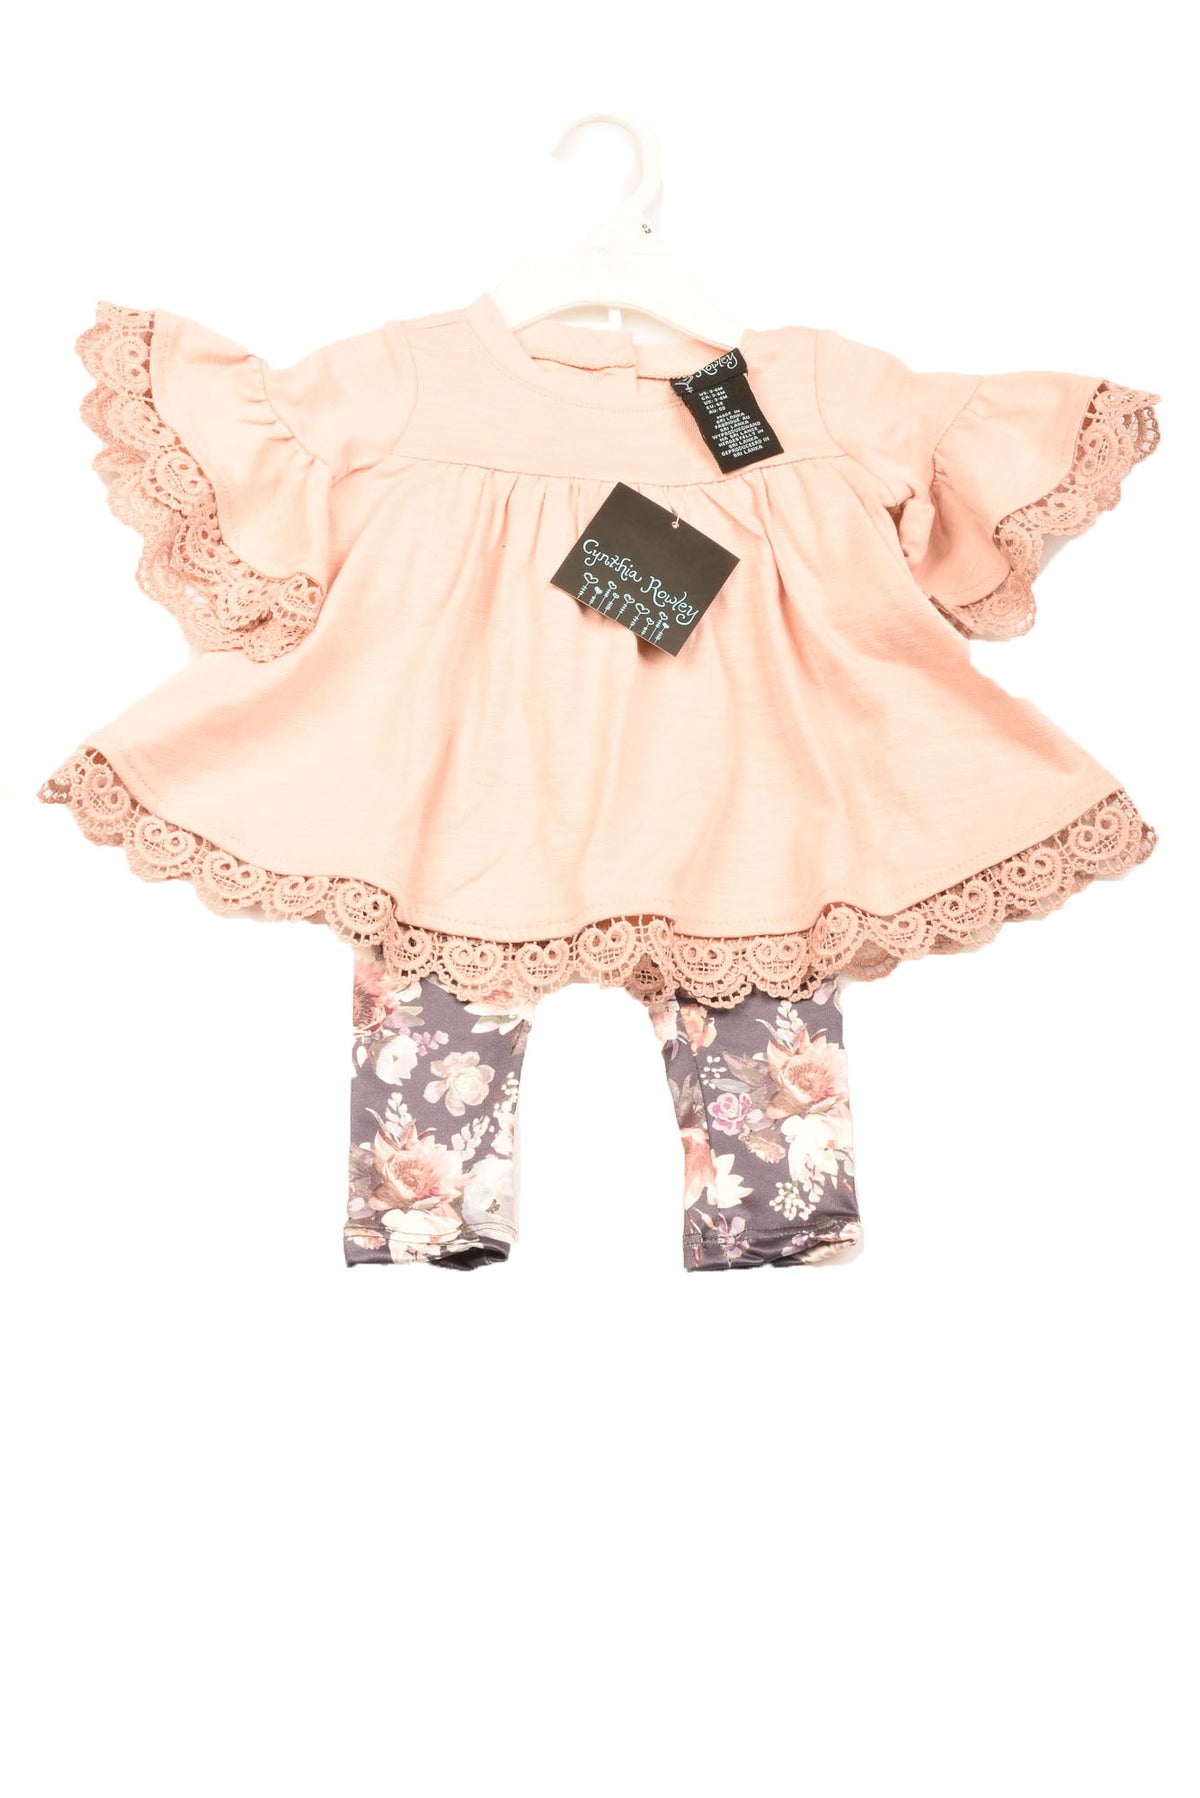 Cynthia Rowley Size 3-6 Months Baby Girl's 2pc Set - Your Designer Thrift